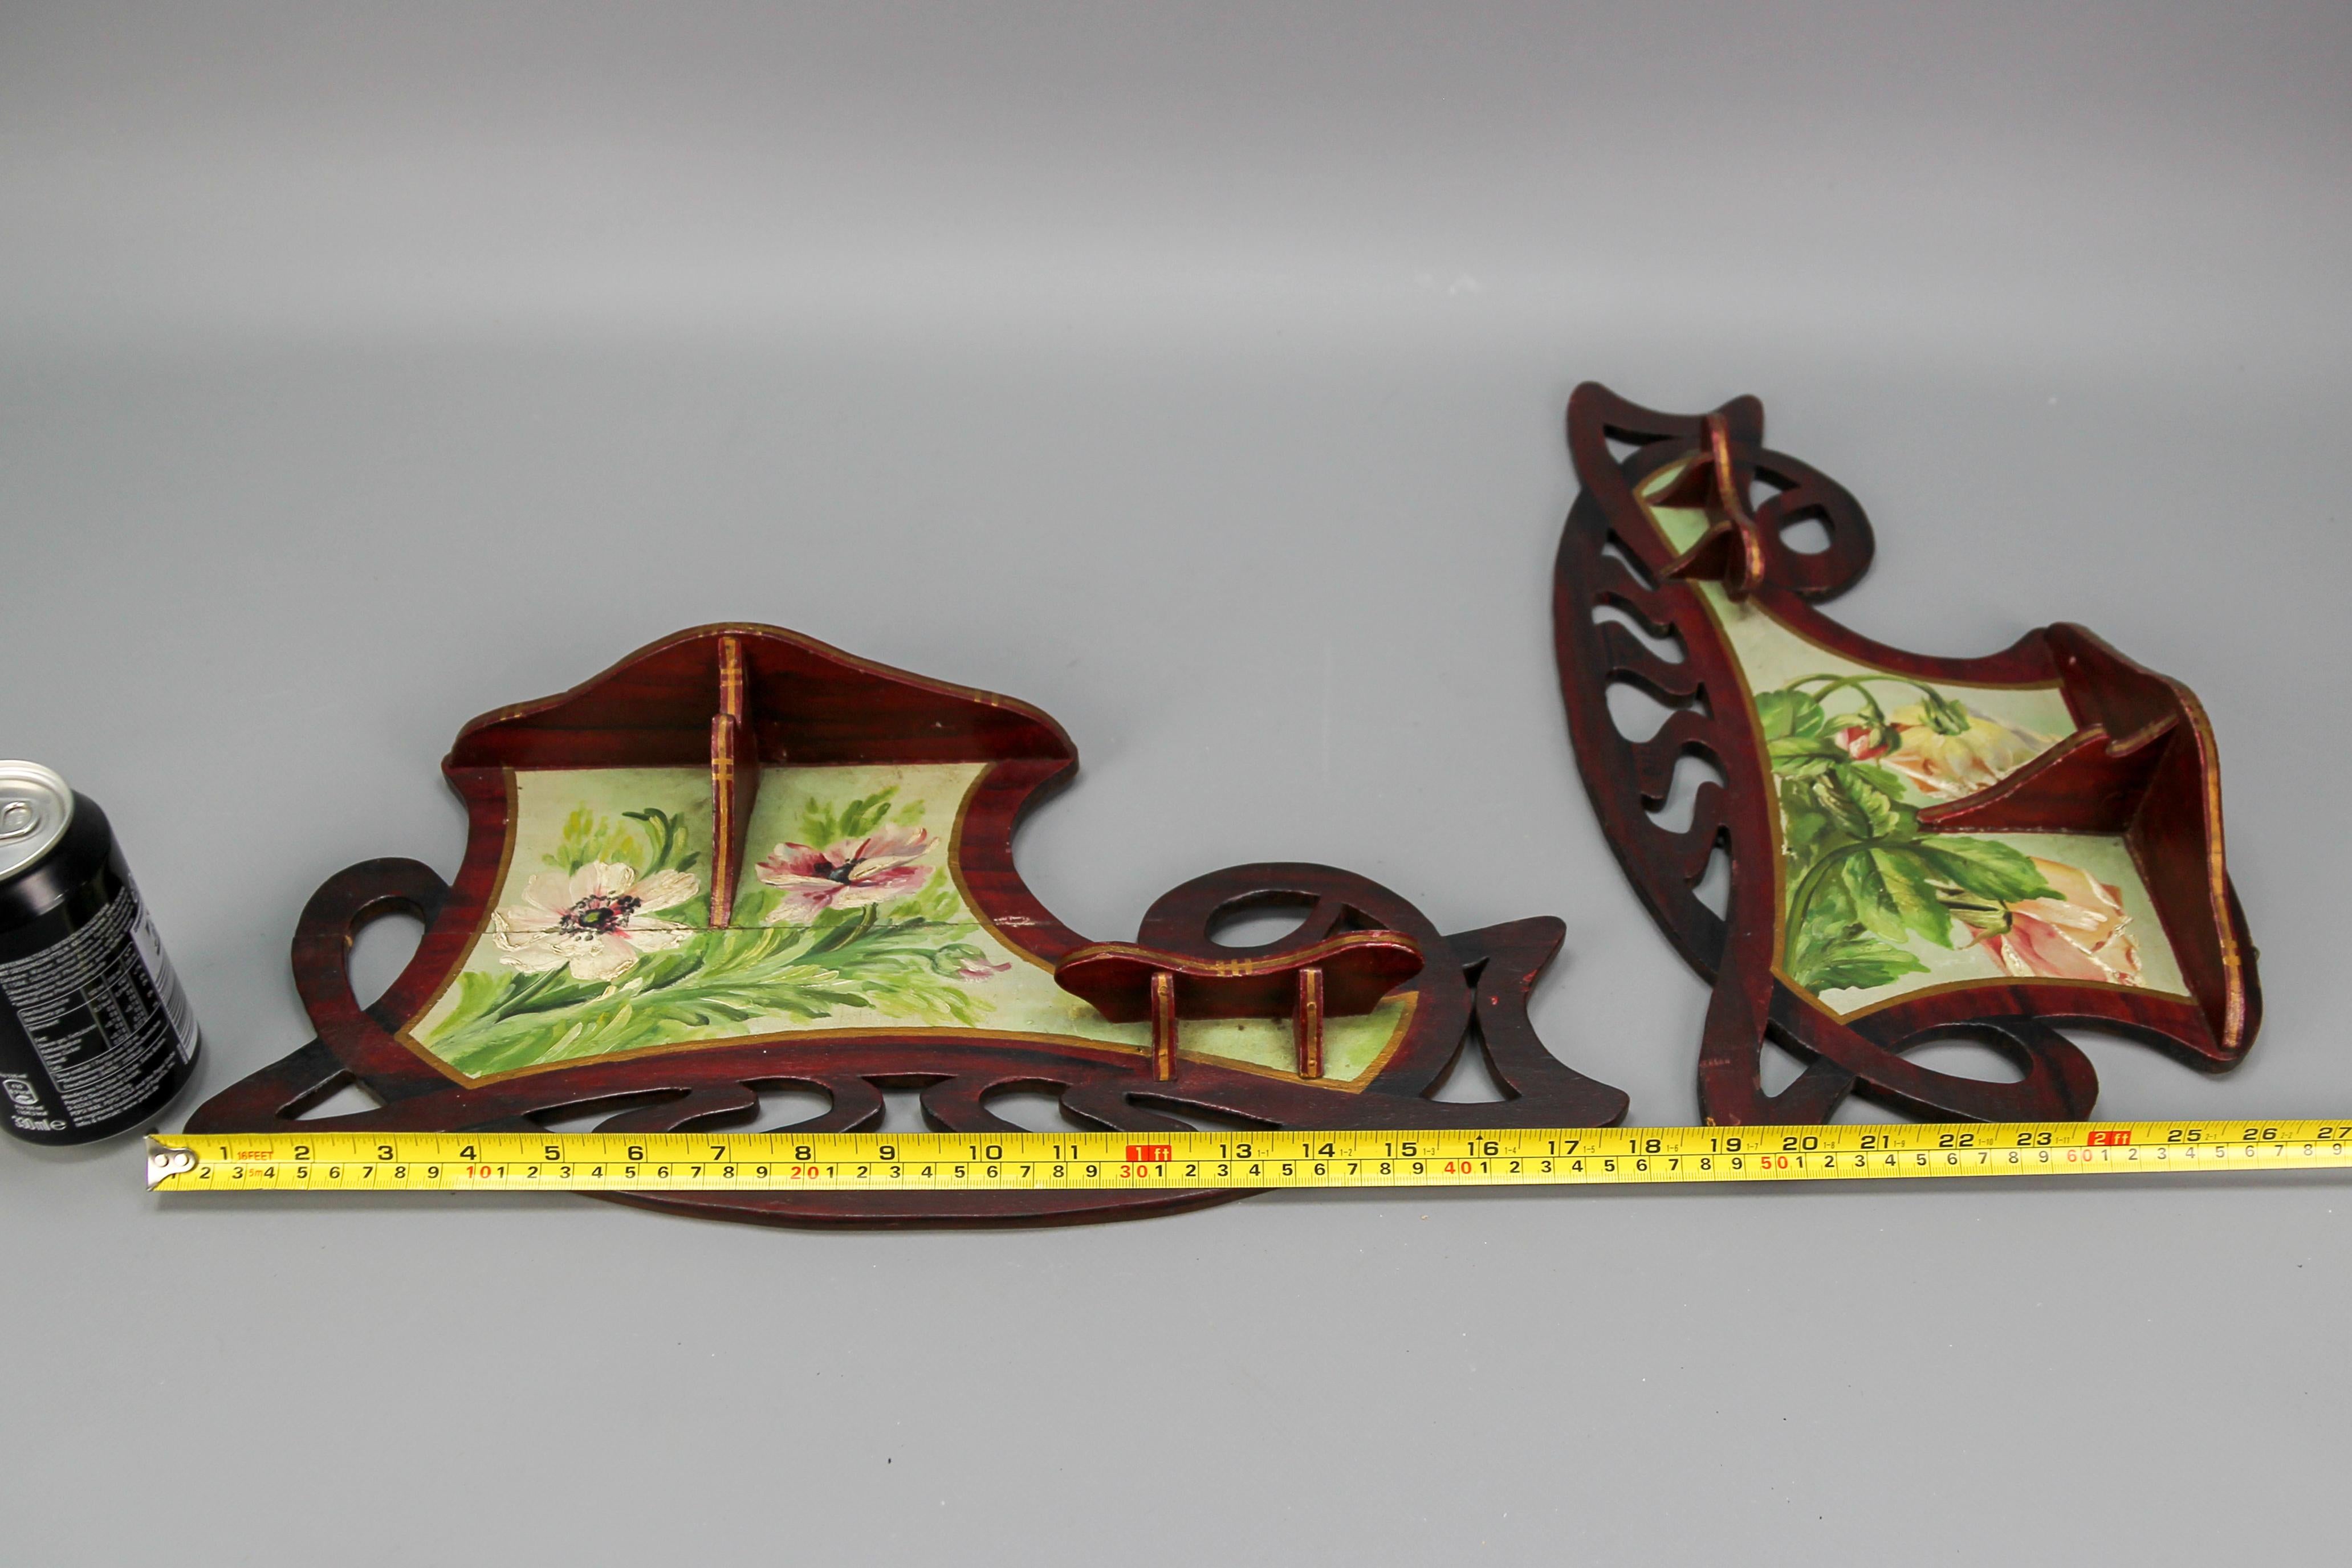 Pair of Art Nouveau Wooden Hand-Painted Floral Shelves, Germany, 1910 For Sale 13